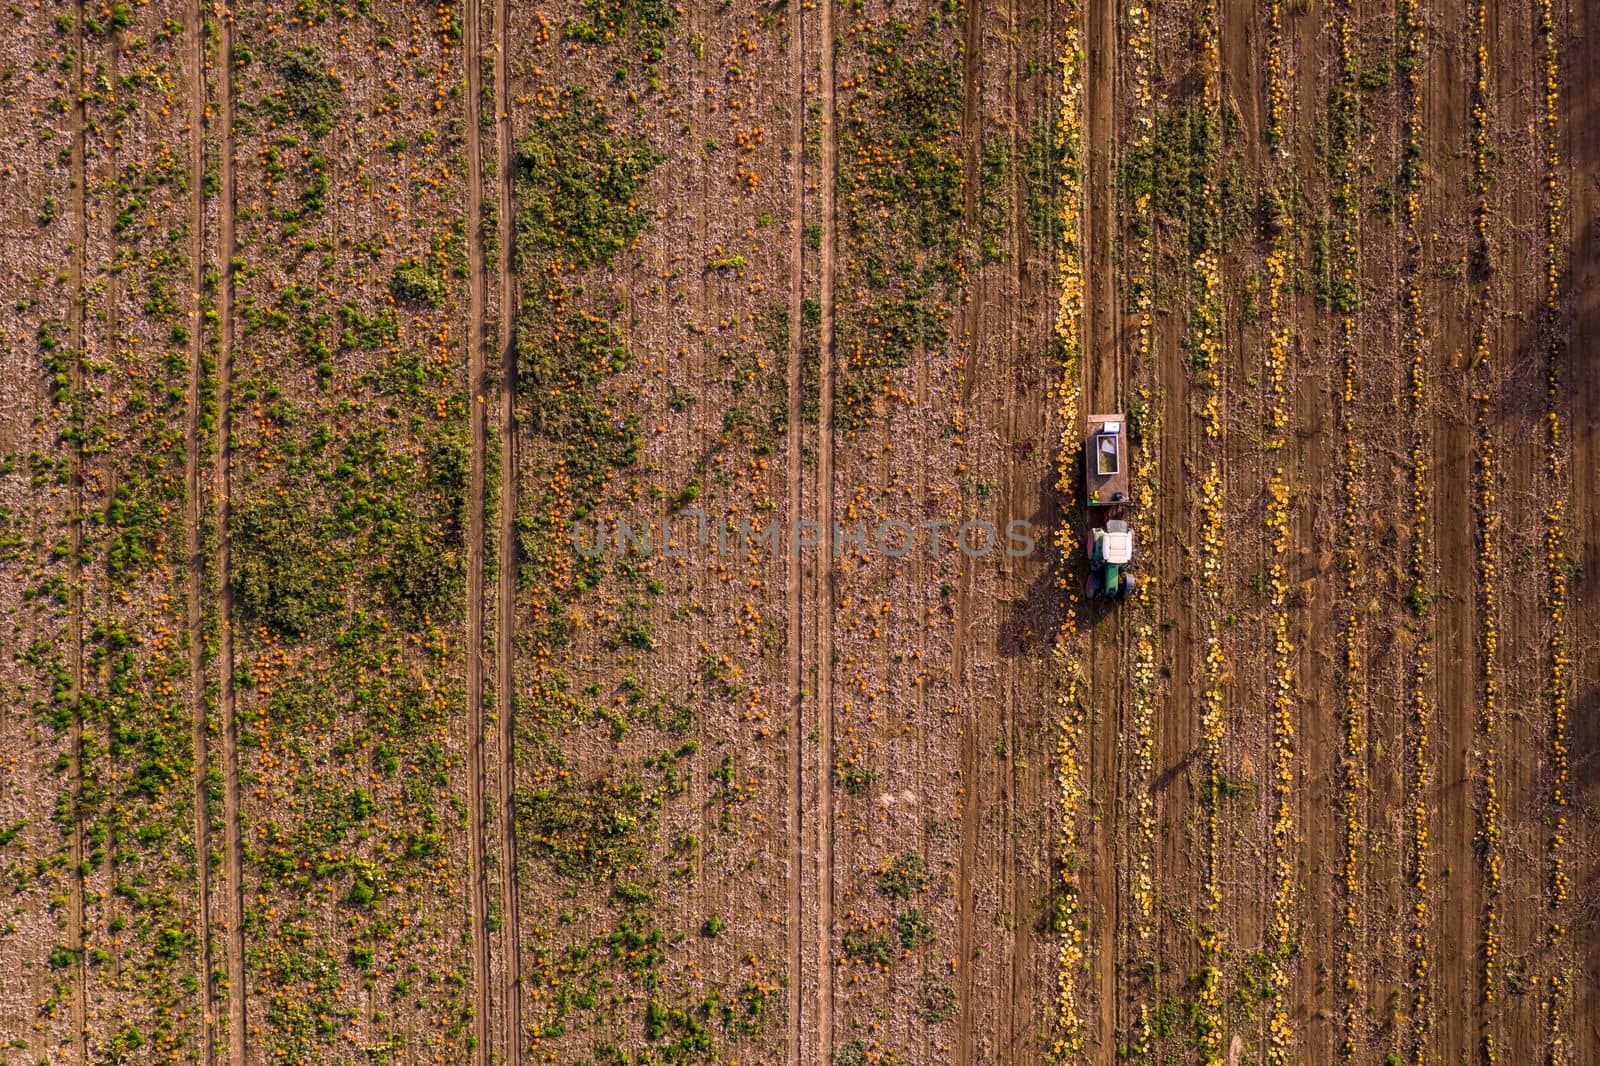 Many pumpkins and hokkaidos on a pumpkin field are harvested by a tractor photographed from the air